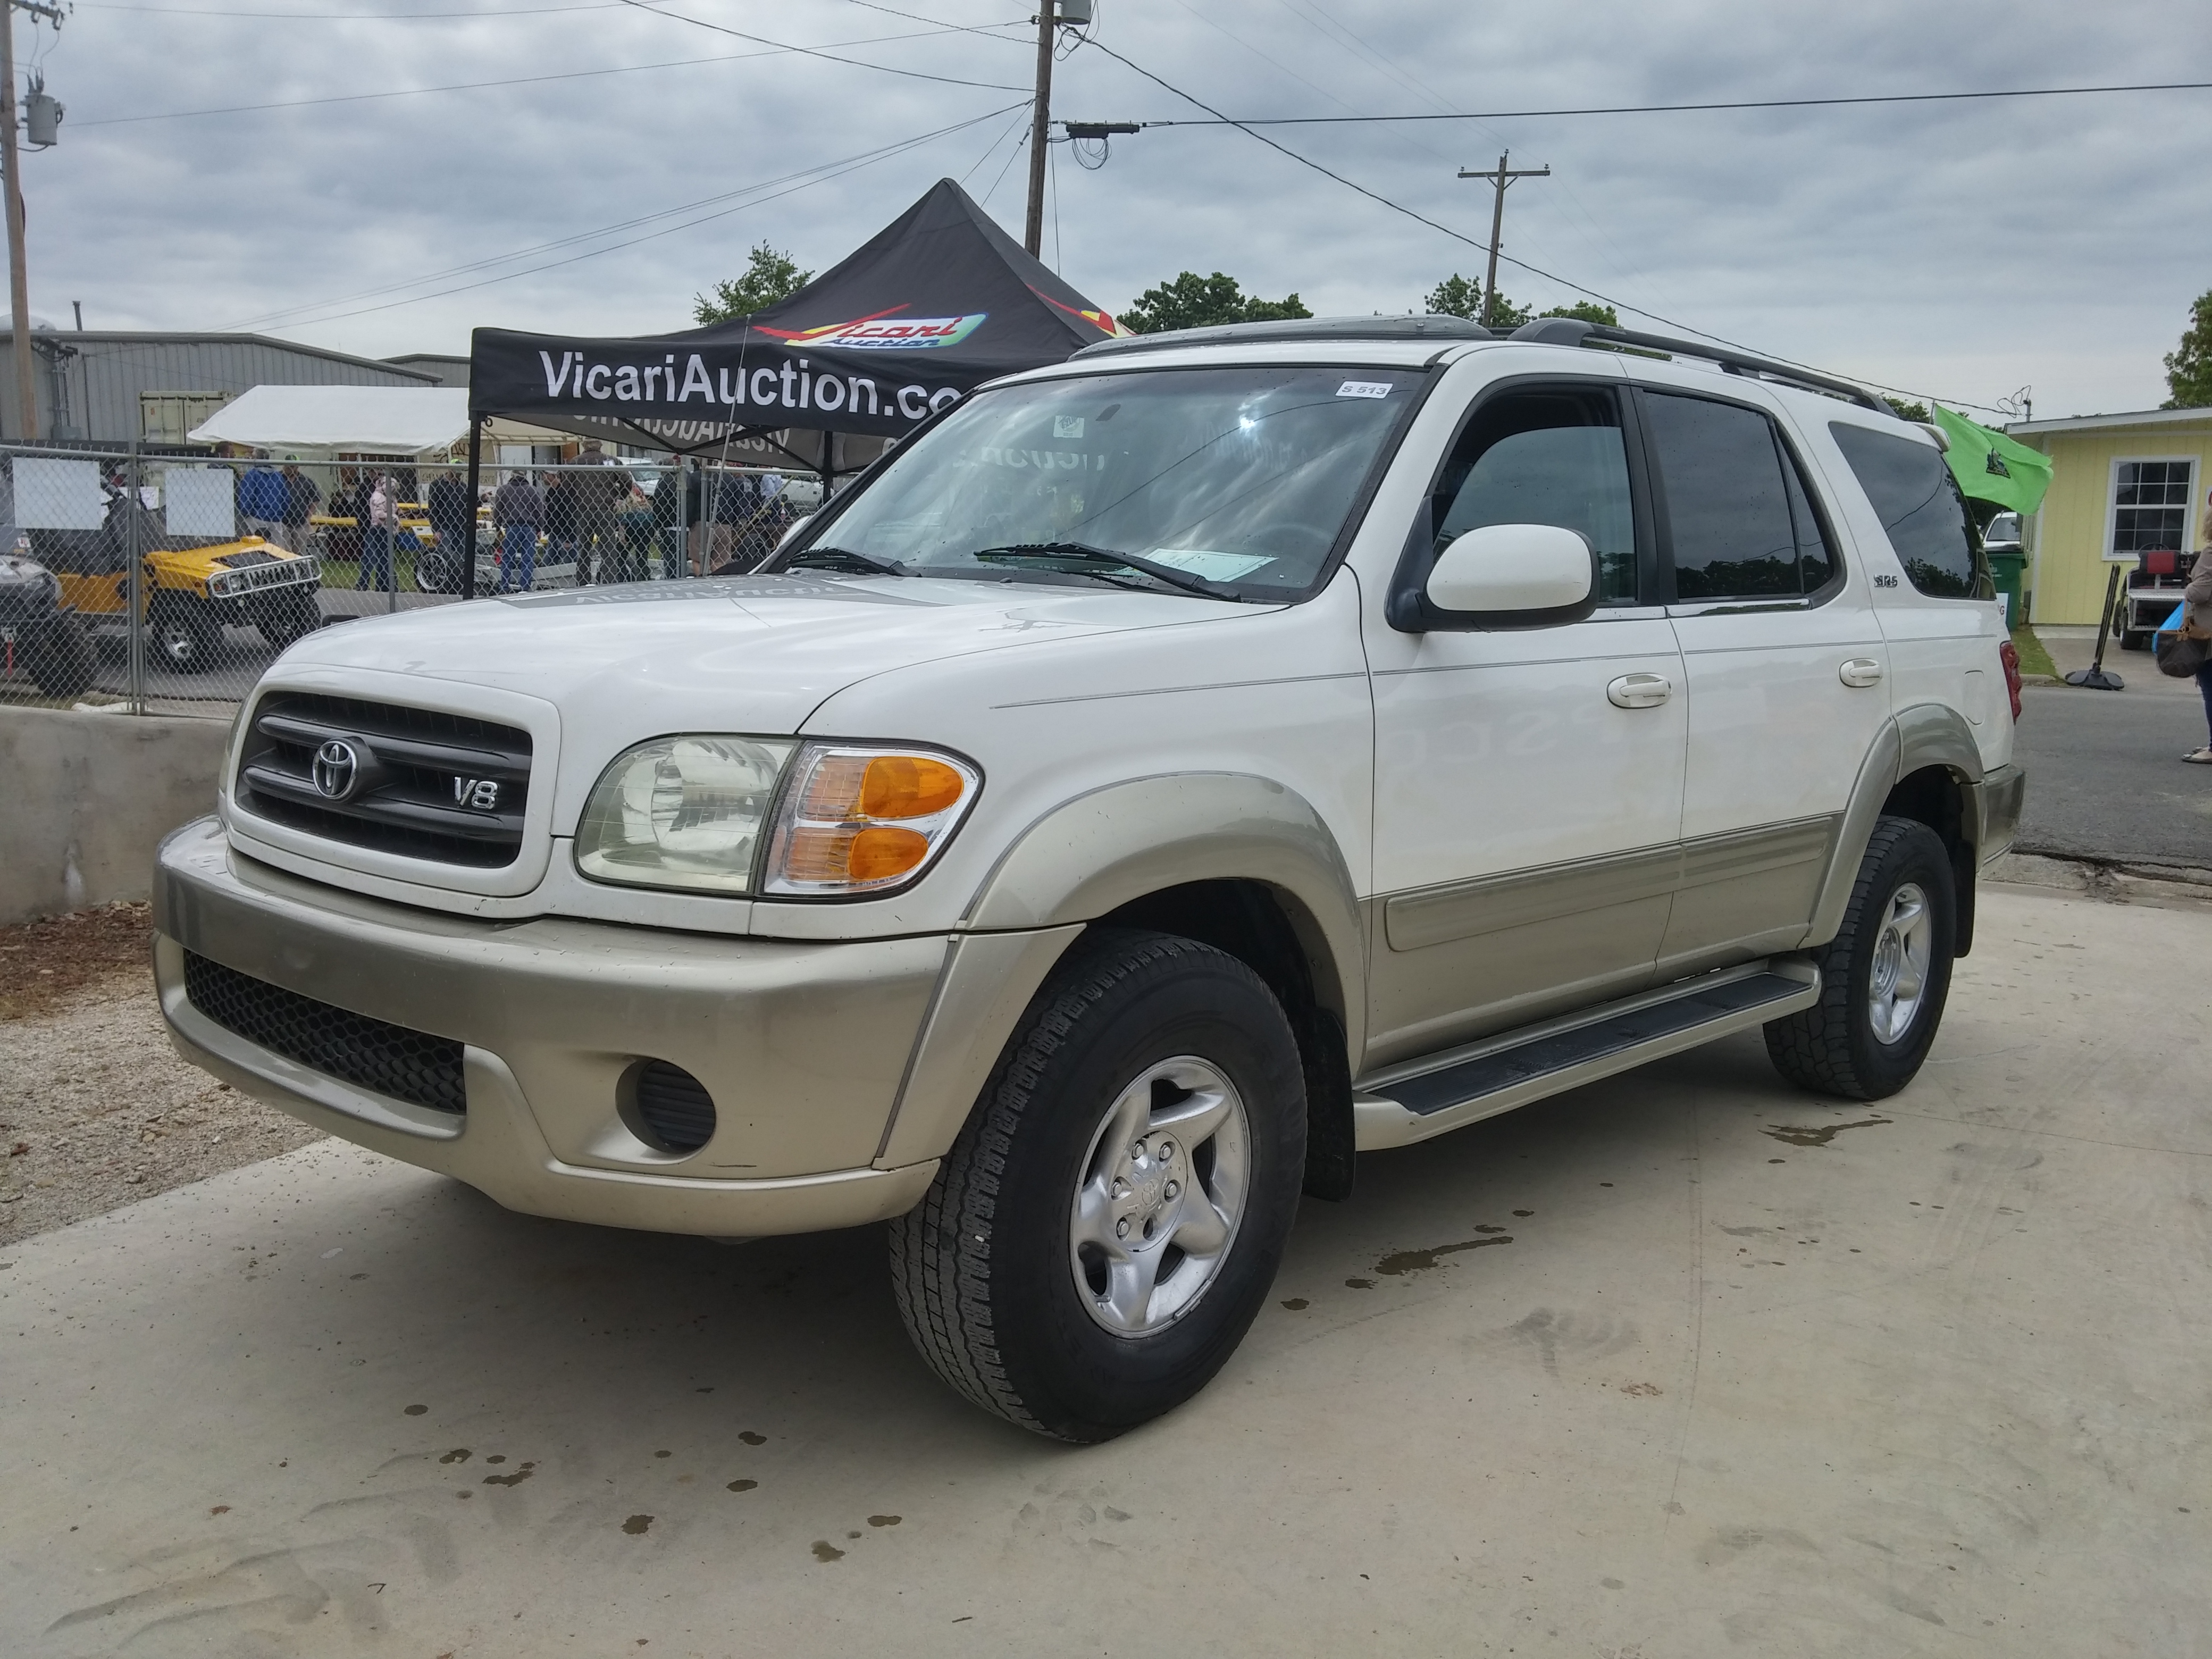 0th Image of a 2001 TOYOTA SEQUOIA VCK40L  SR5